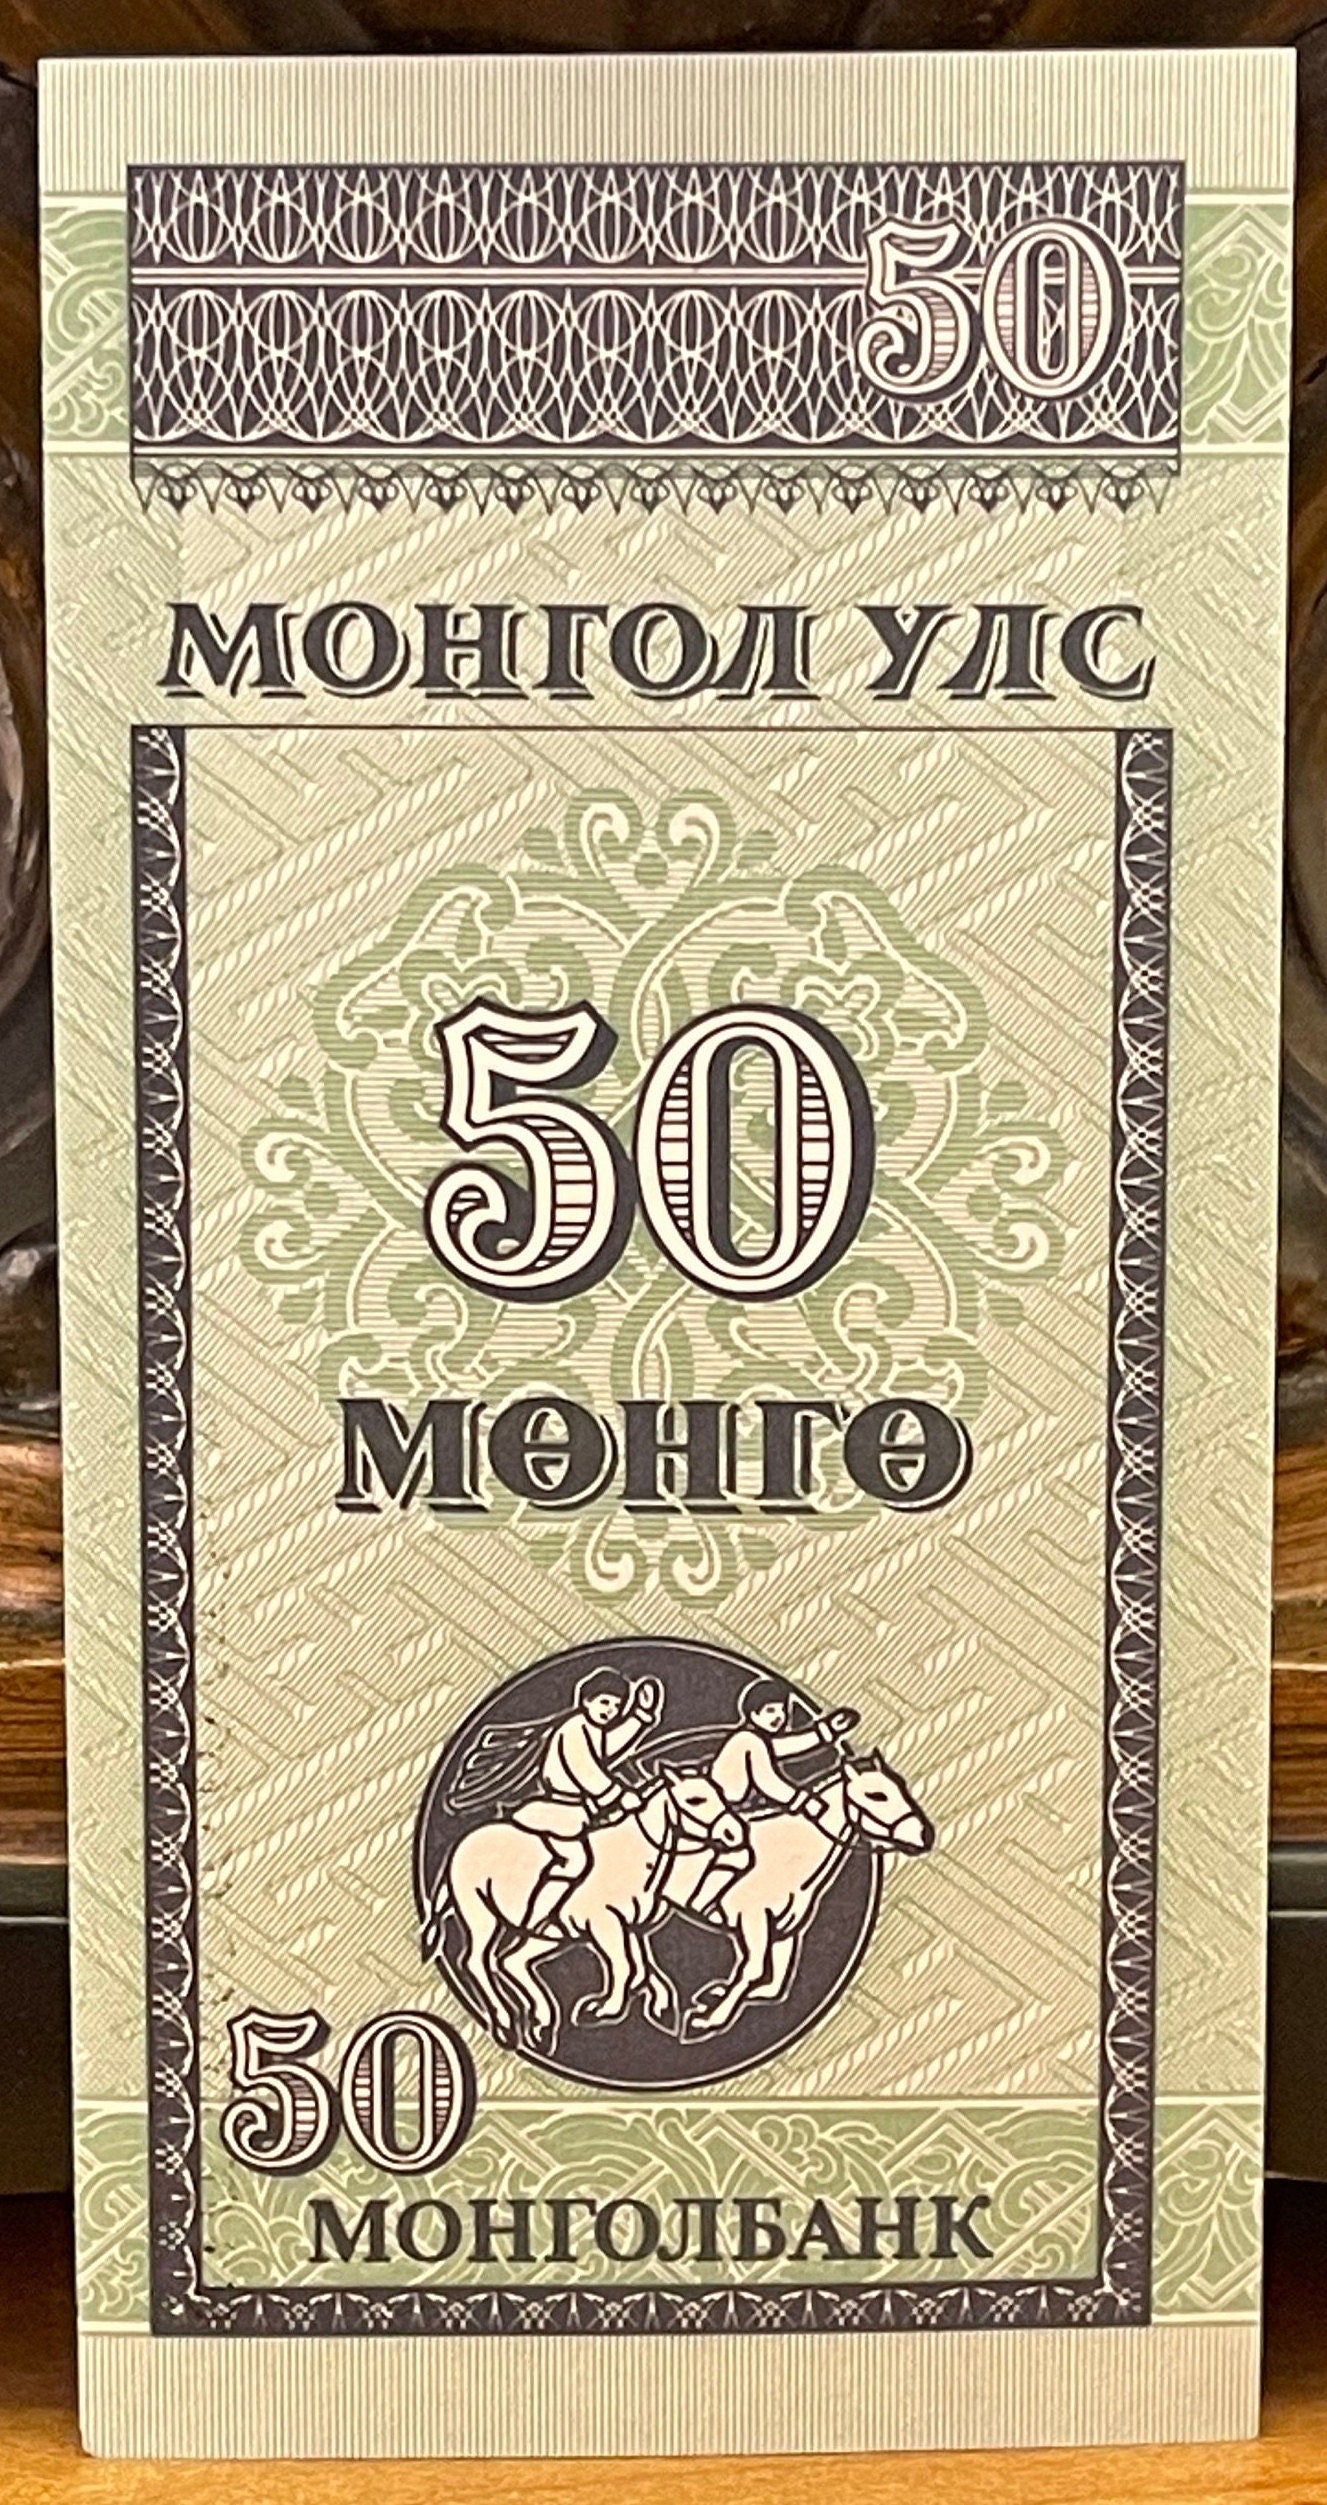 Horse Racing, Soyombo & Endless Knot 50 Möngö Mongolia Authentic Banknote Money for Jewelry and Collage (1993) (Young Riders) (Naadam)